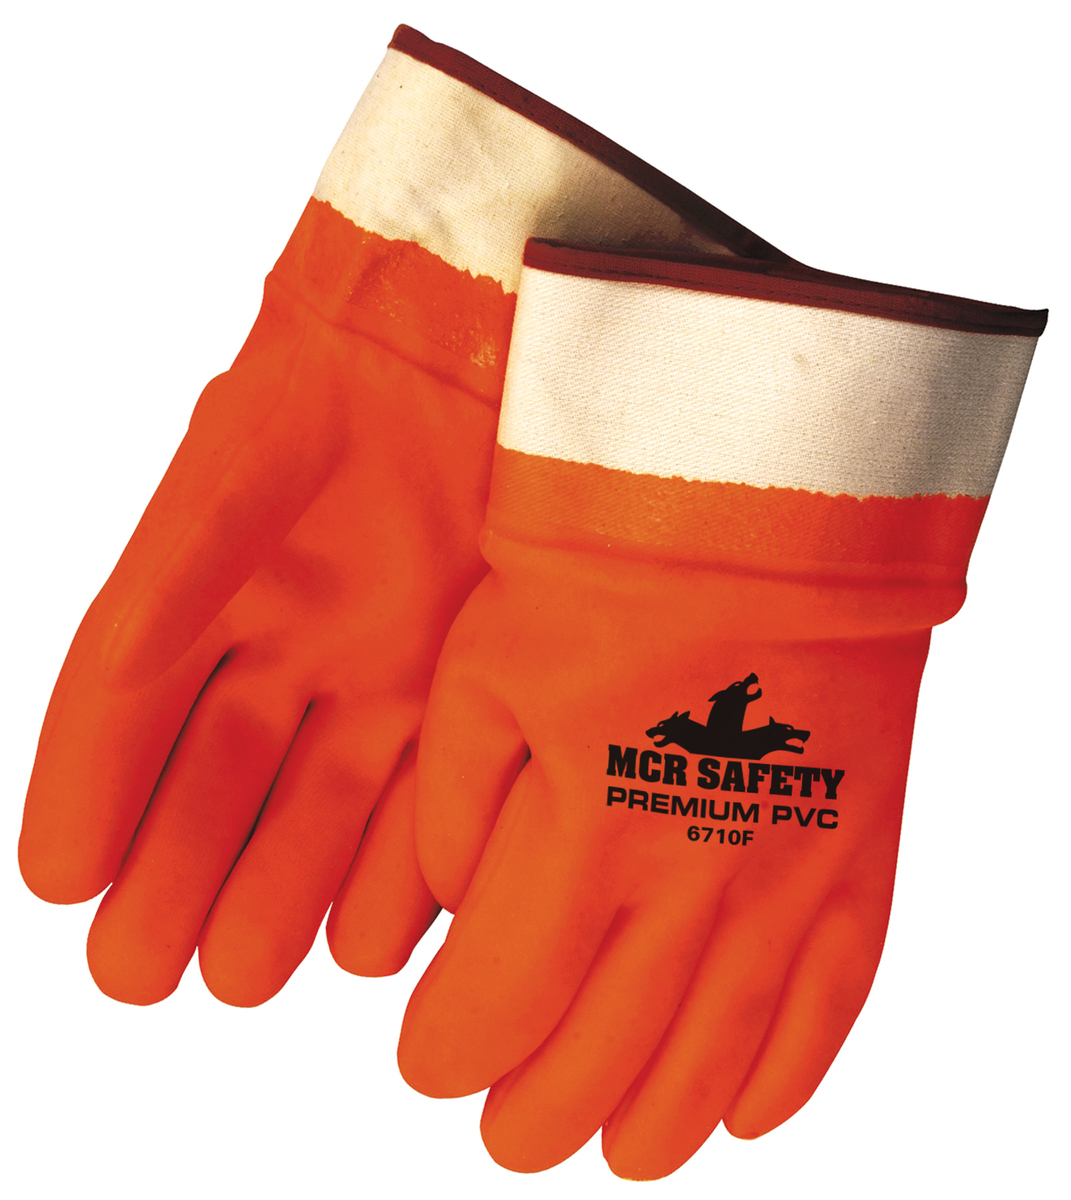 PVC Coated 11.5" Insulated Work Gloves with Foam Lining